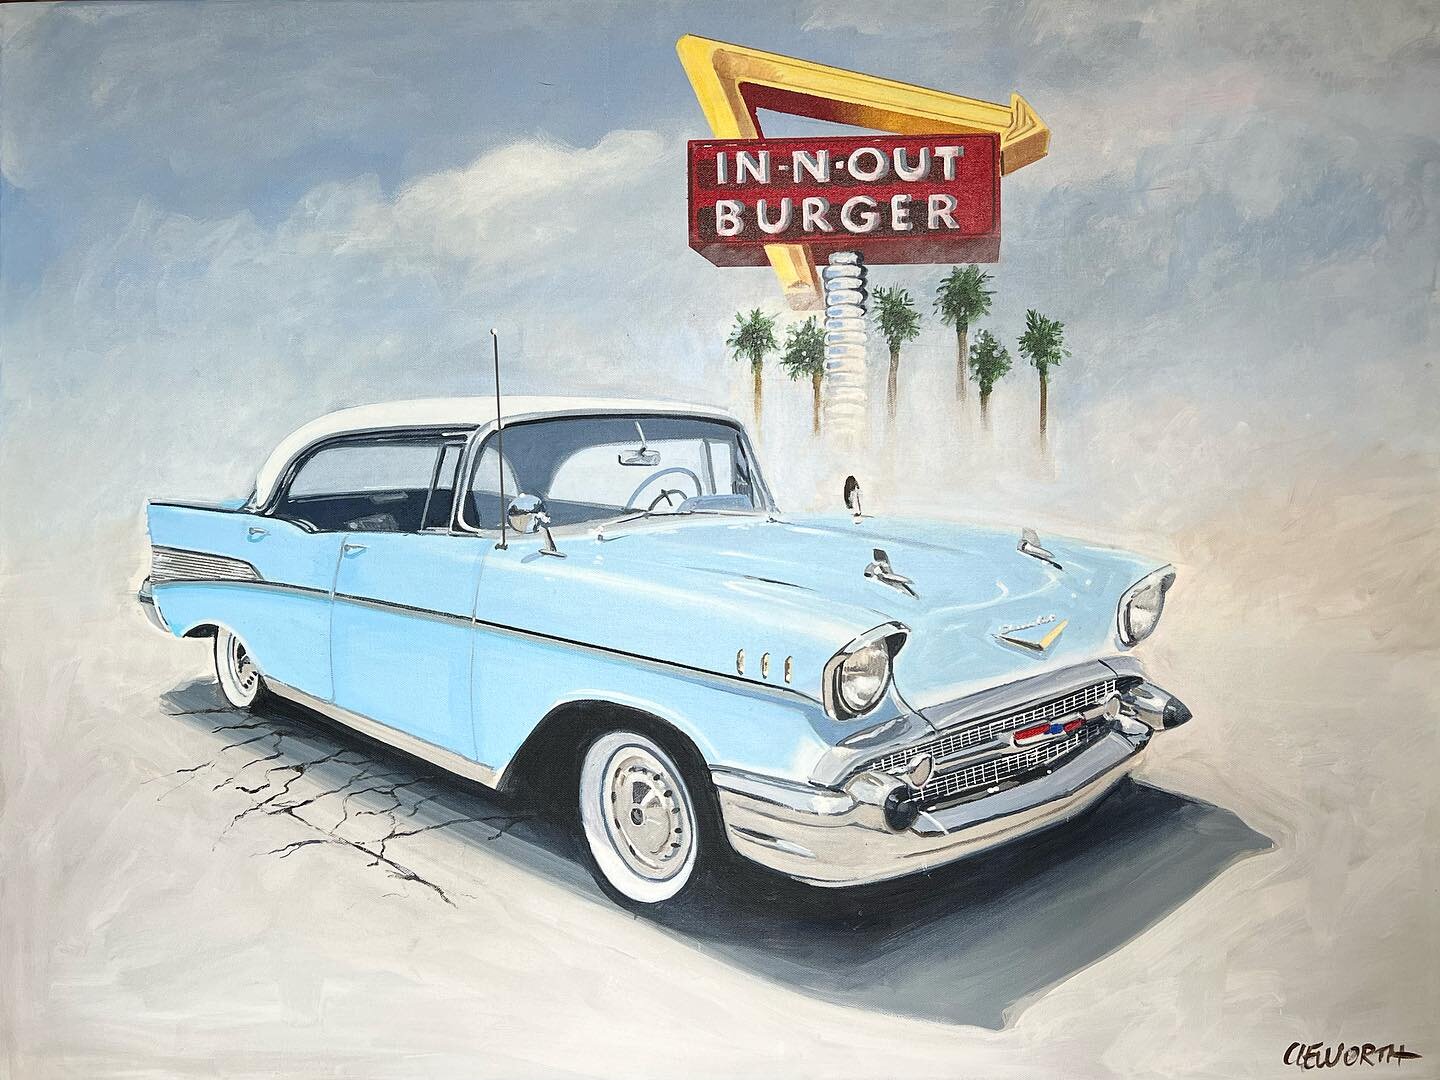 This past year I was commissioned by a 10 year old boy to paint his favorite car (1957 Chevy Bel Air) in front of his favorite fast food place @innout 

Never imagined I would be doing a painting for someone so young at my age. 

Hope you guys like i